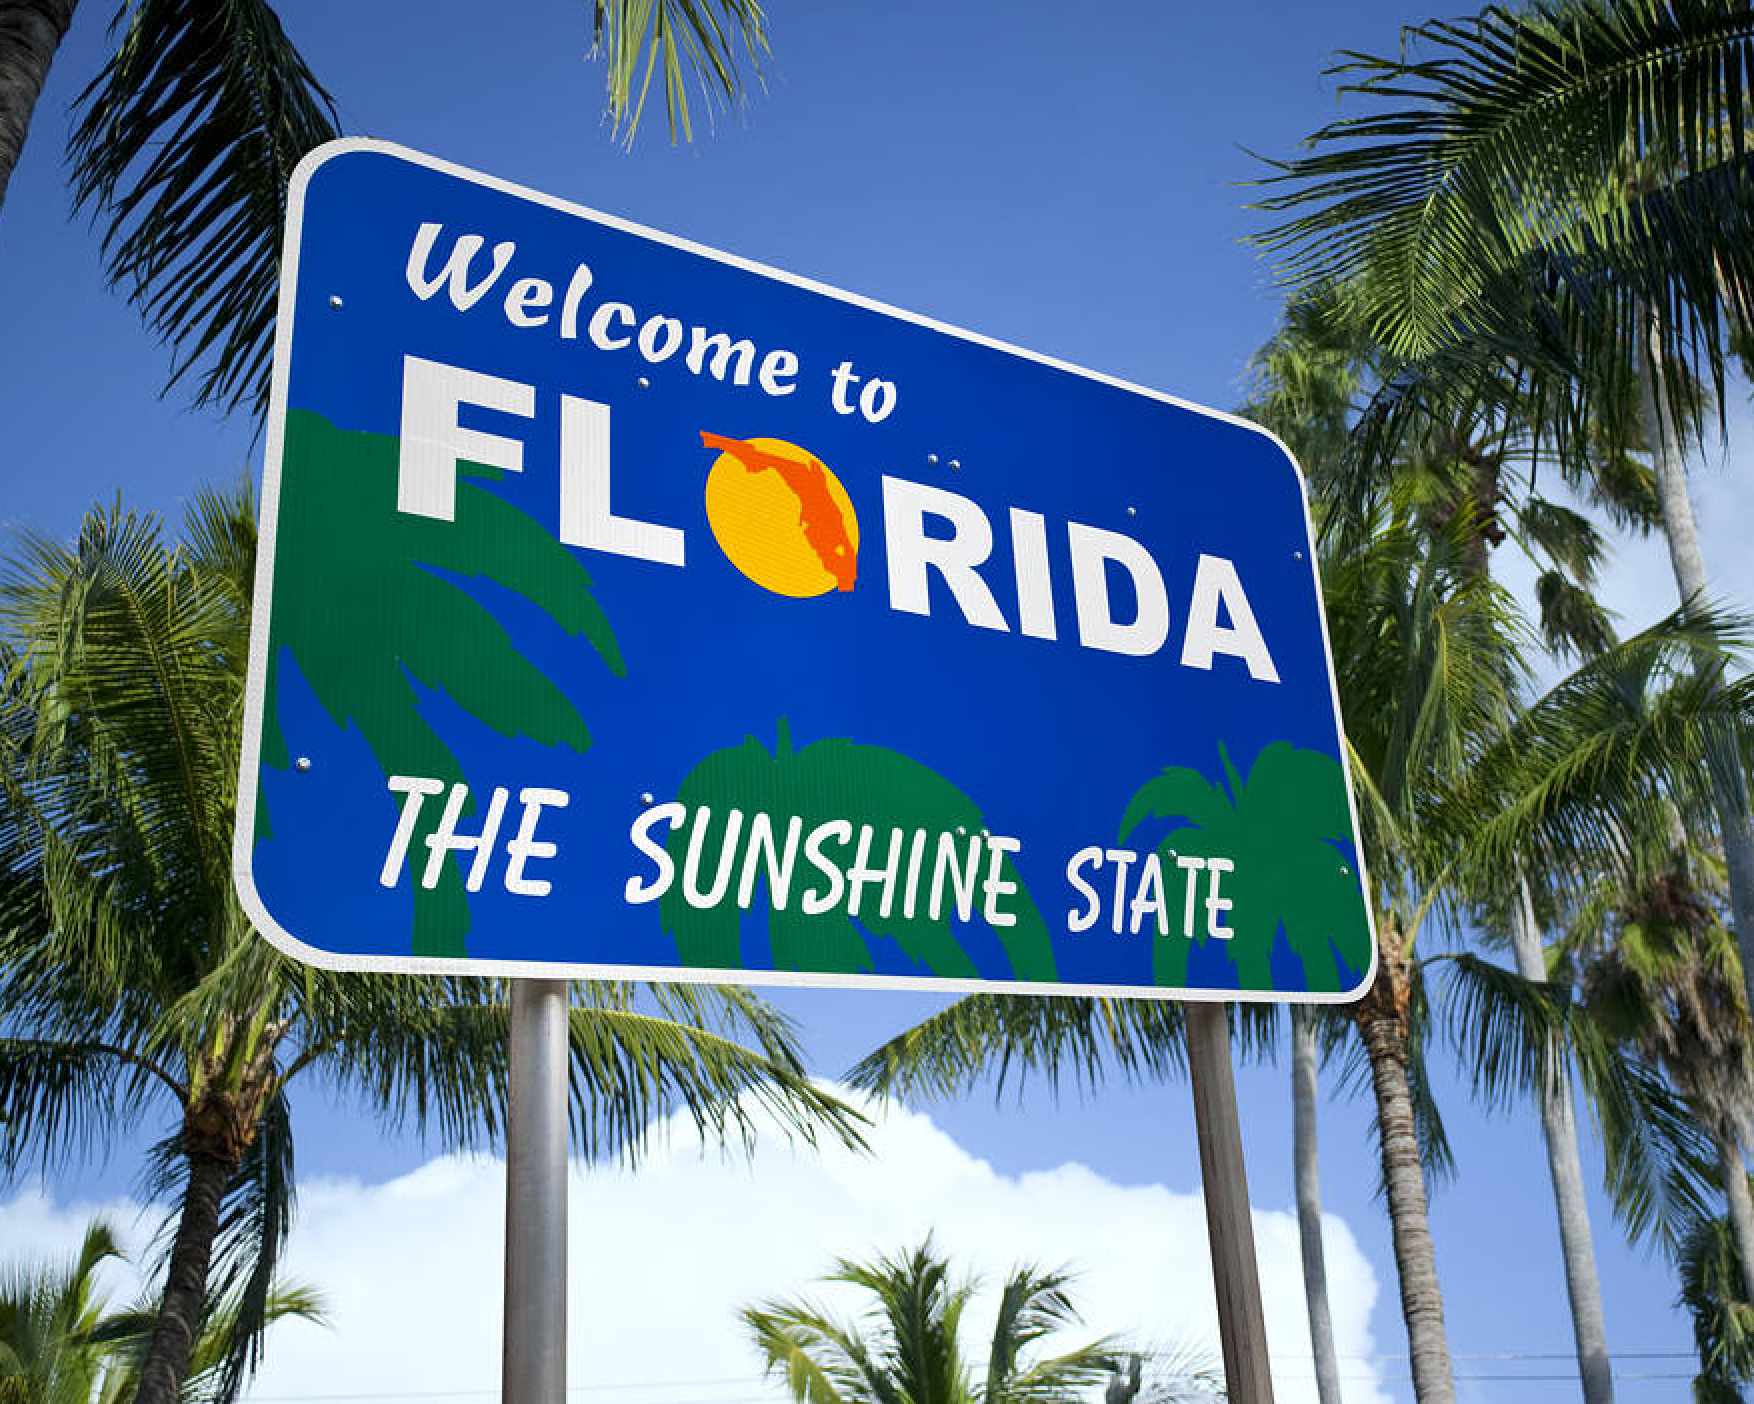 Facts about Florida